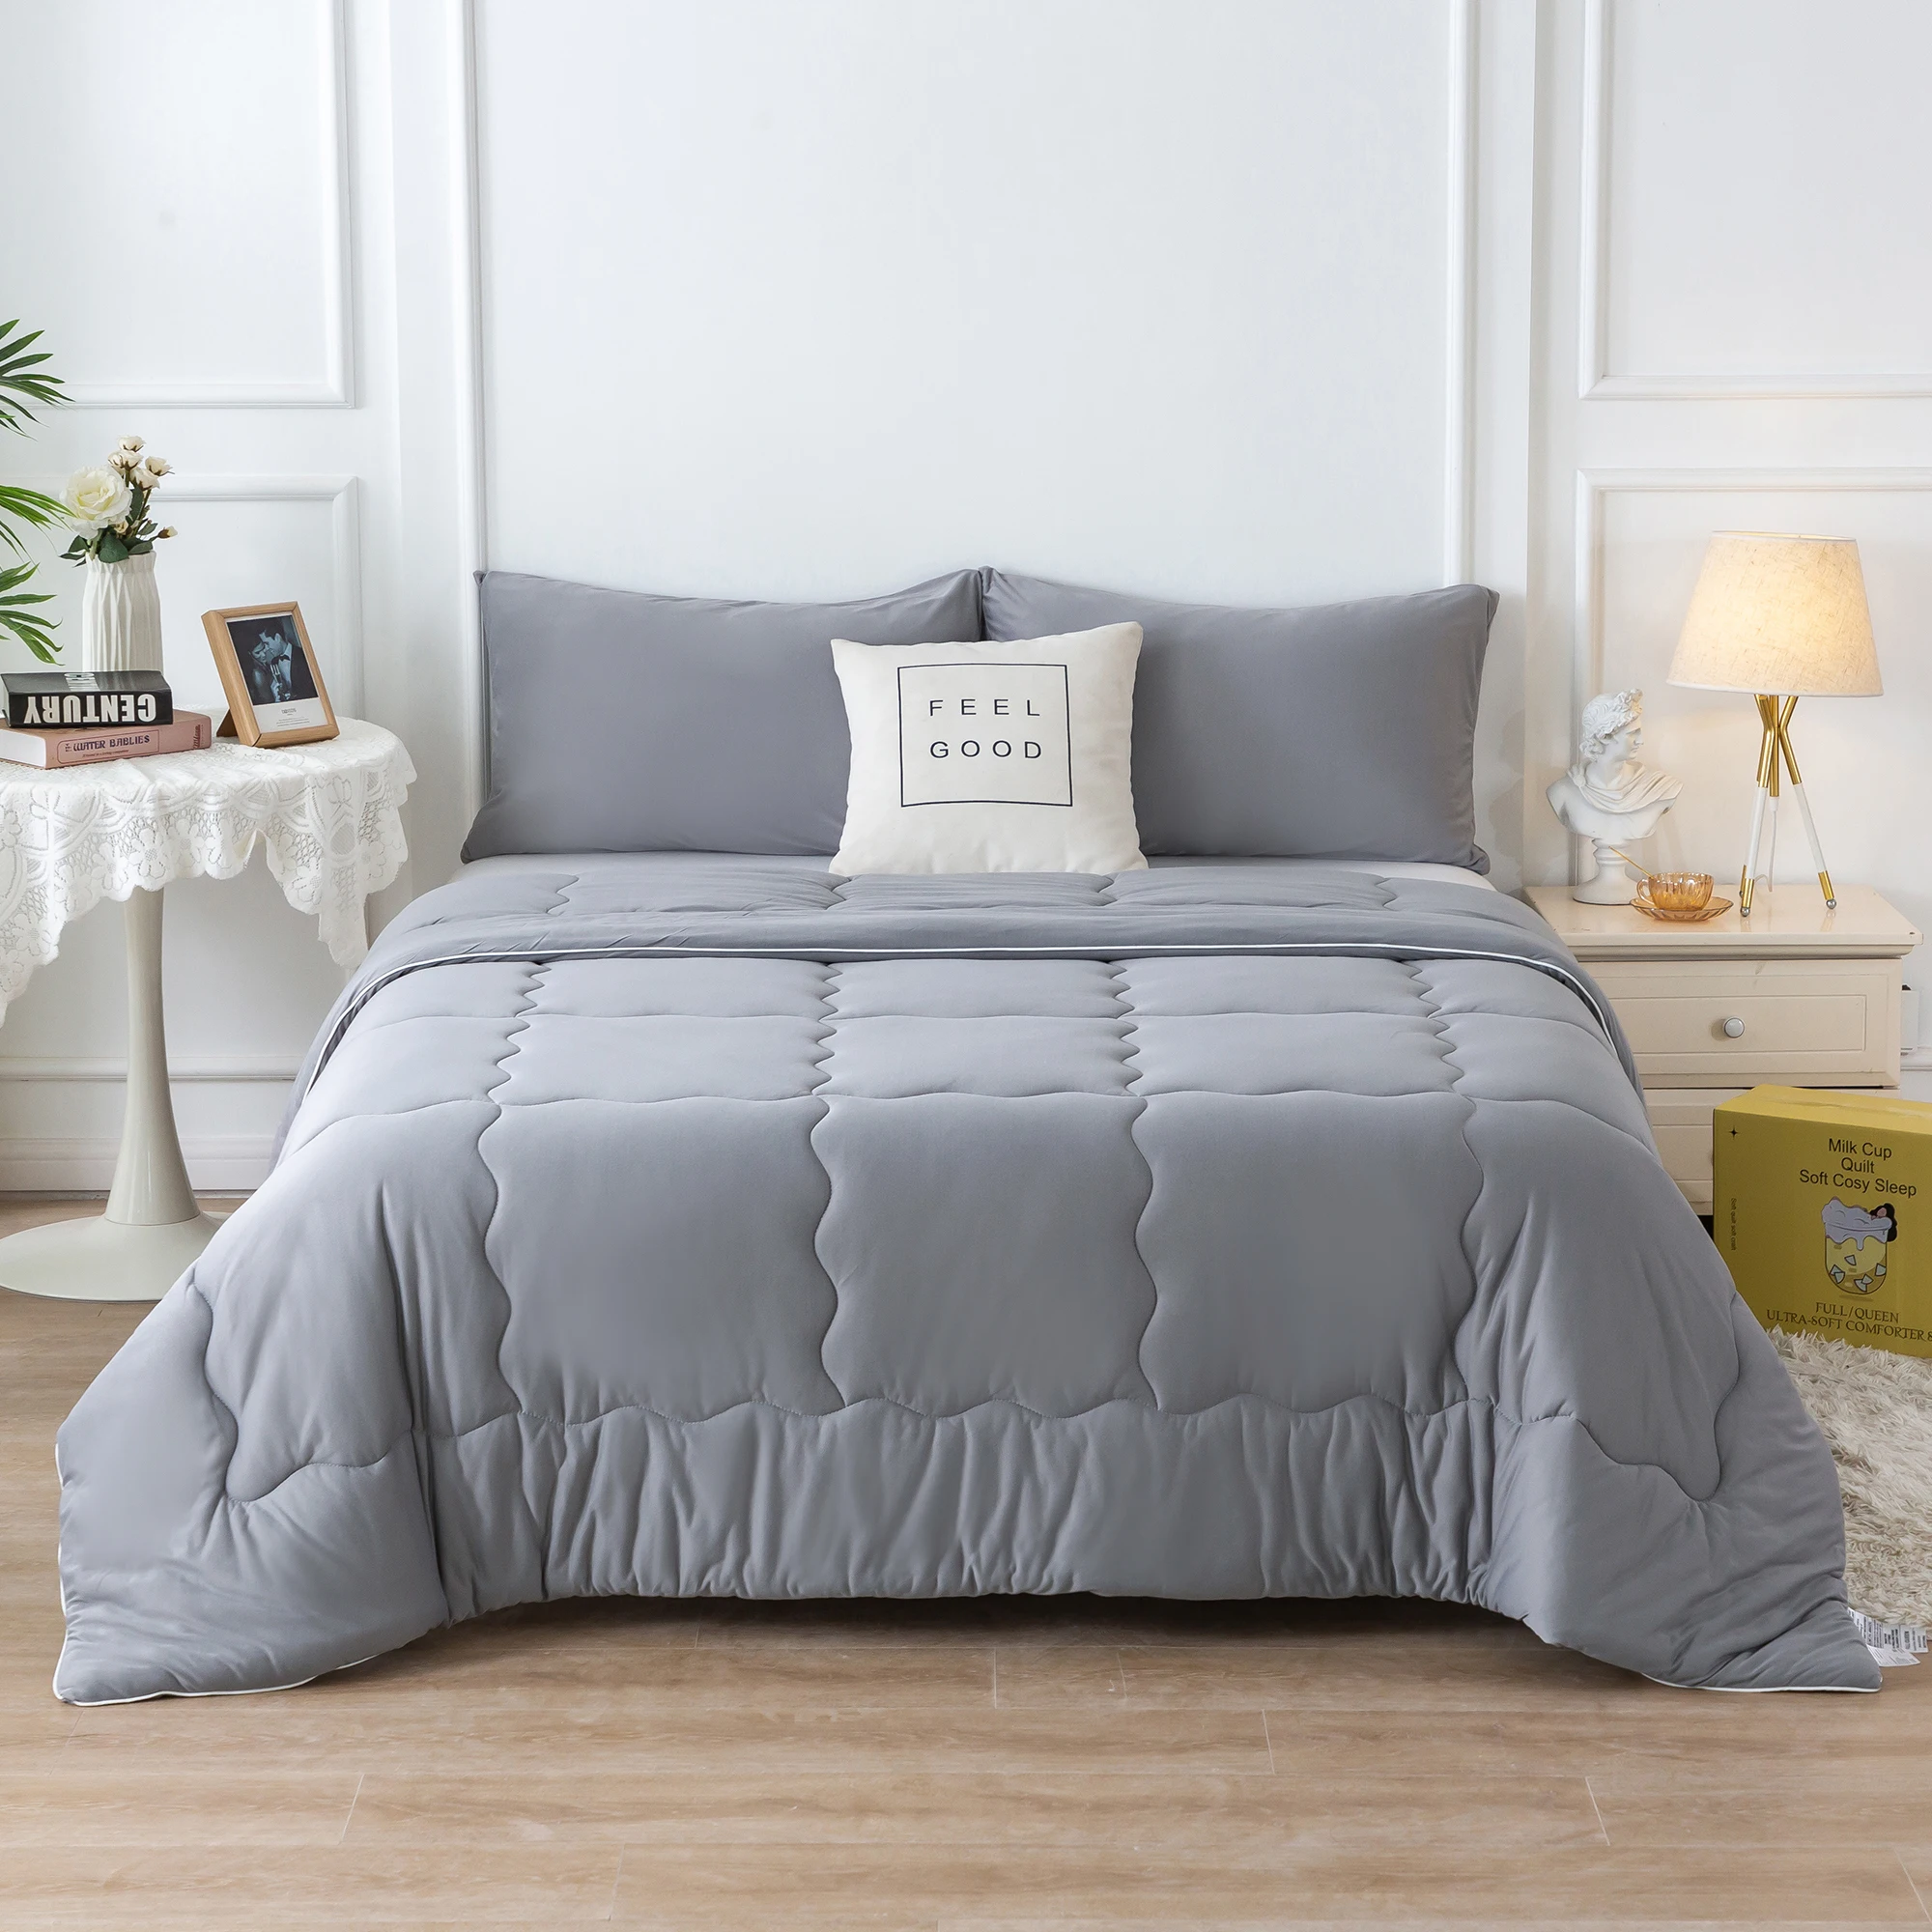 

Dark Grey Reversible Twin Size Ultra-Soft Comforter Set Knit Cotton Cozy Fully Breathable Solid Color Bedding with 2 Pillowcase